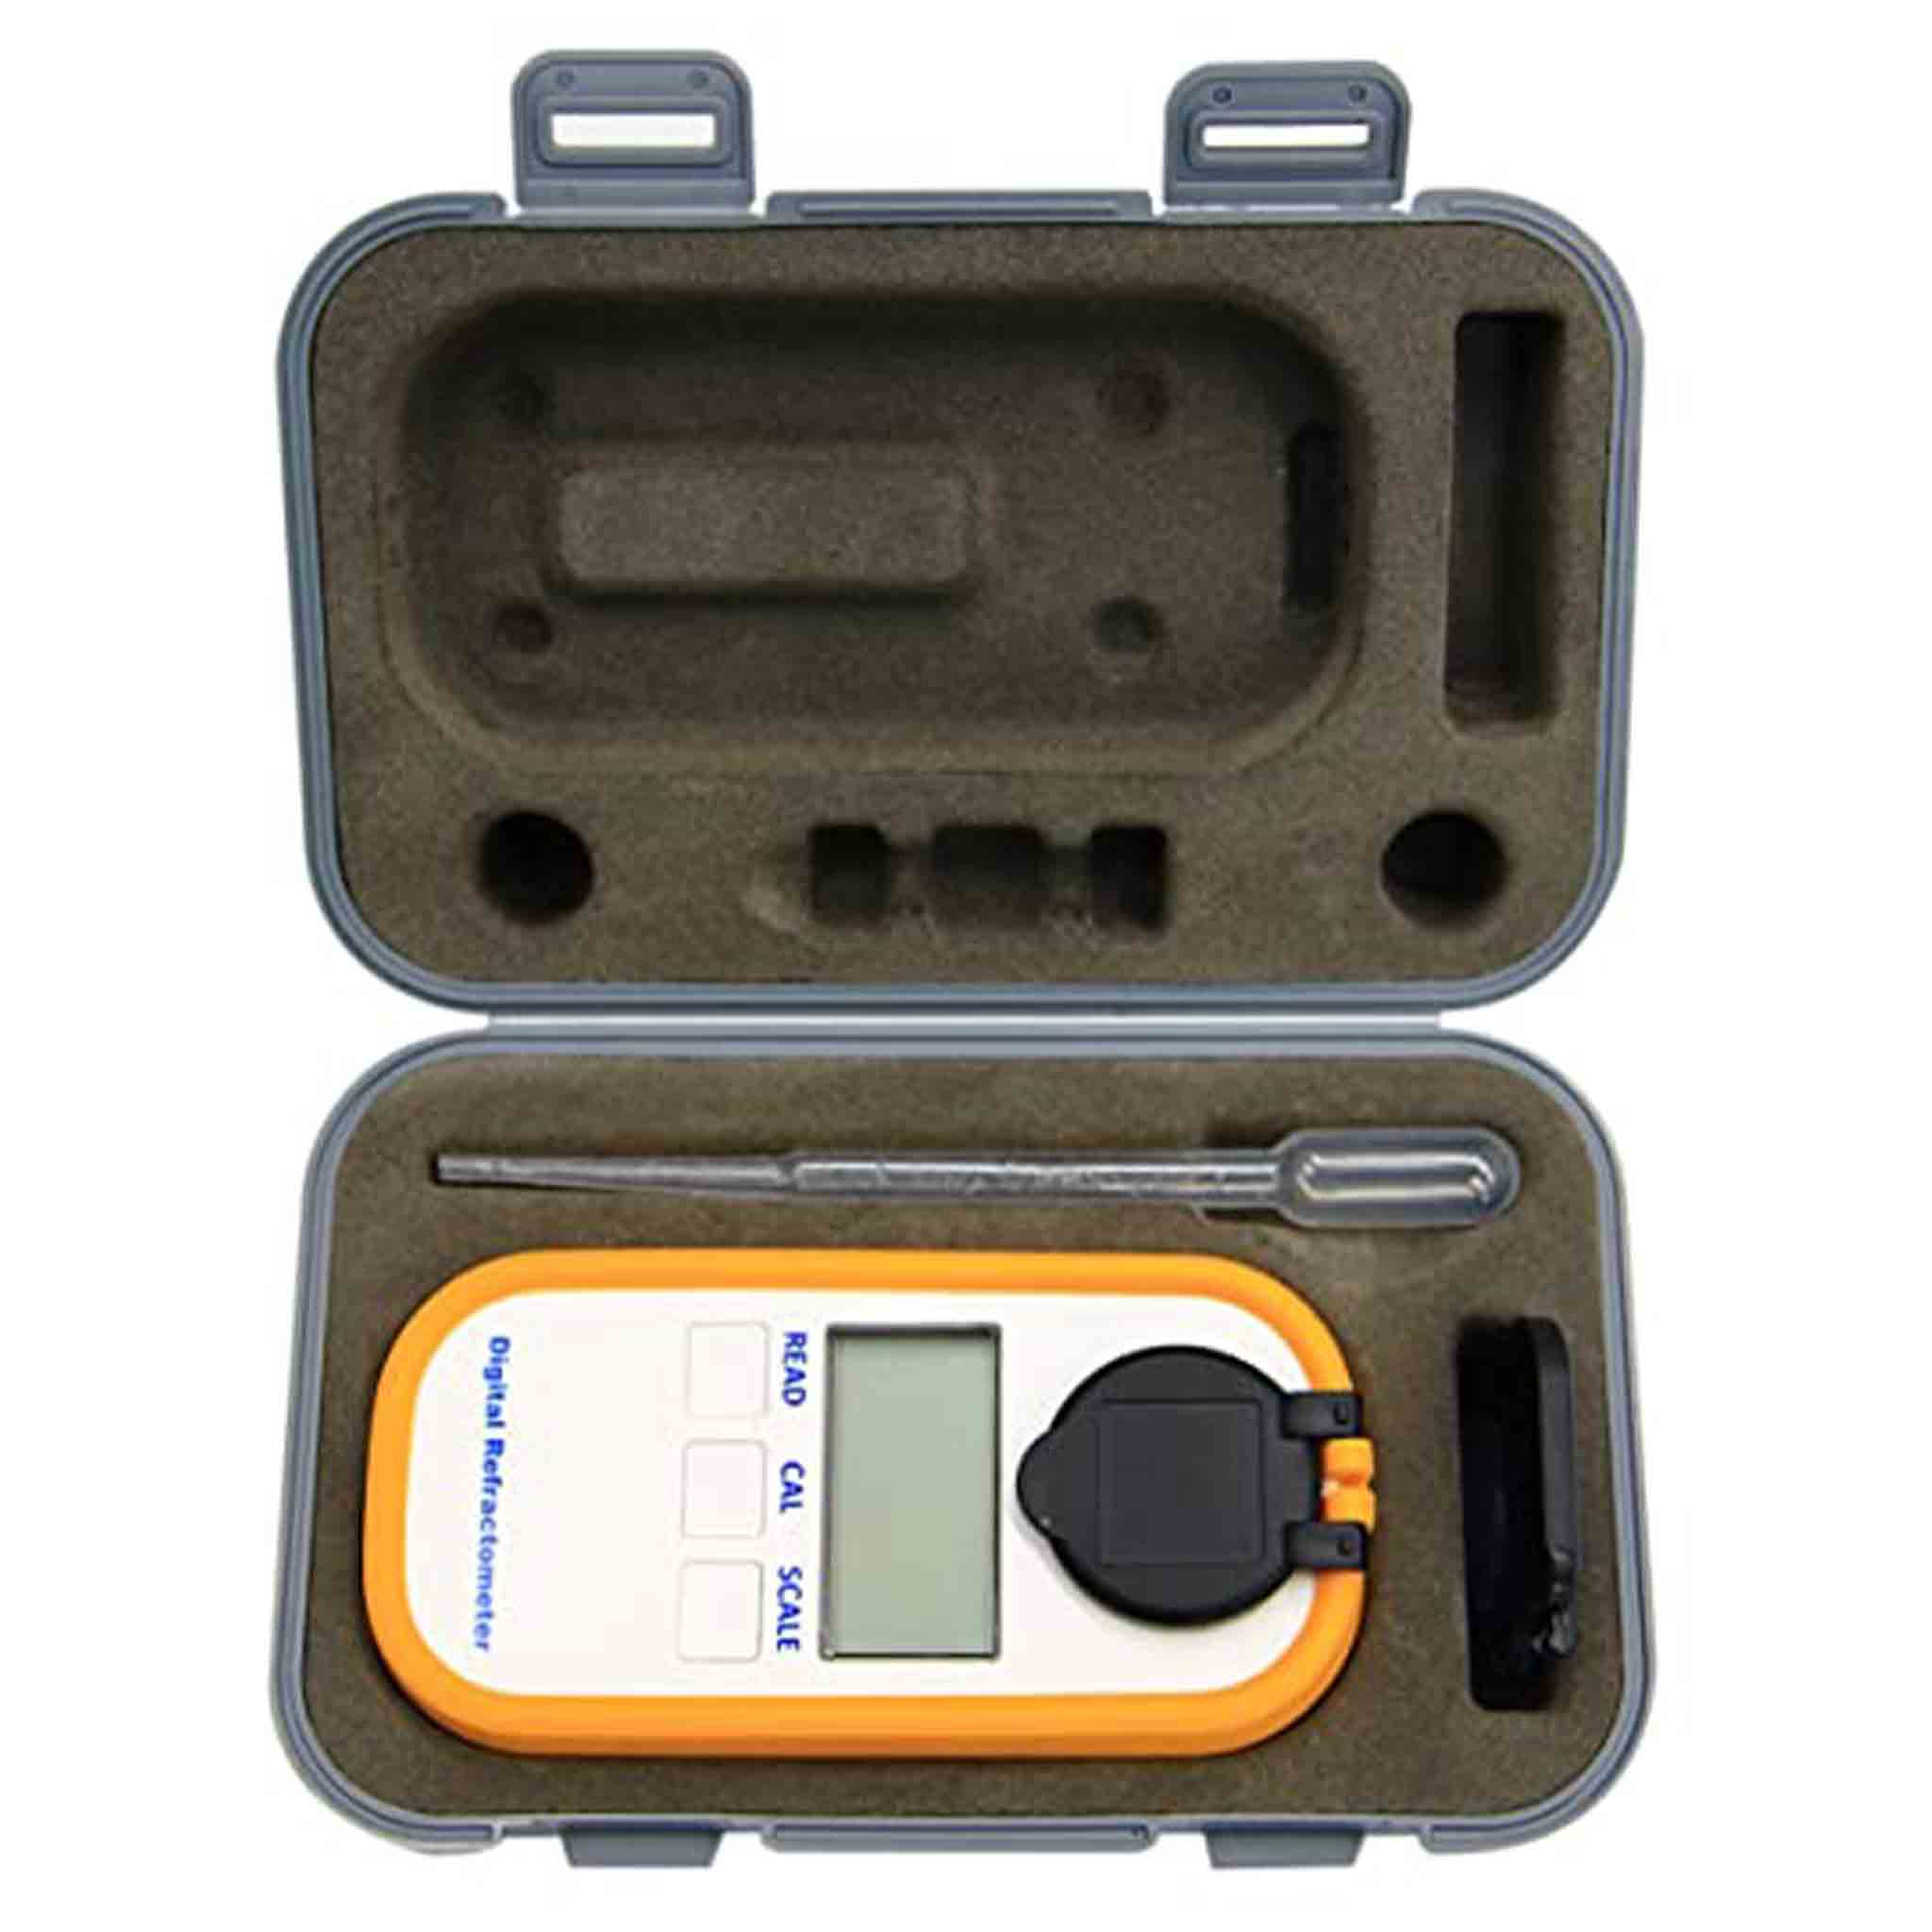 Digital Honey Refractometer for Measuring Water Content in Honey - Processing collection by Buzzbee Beekeeping Supplies